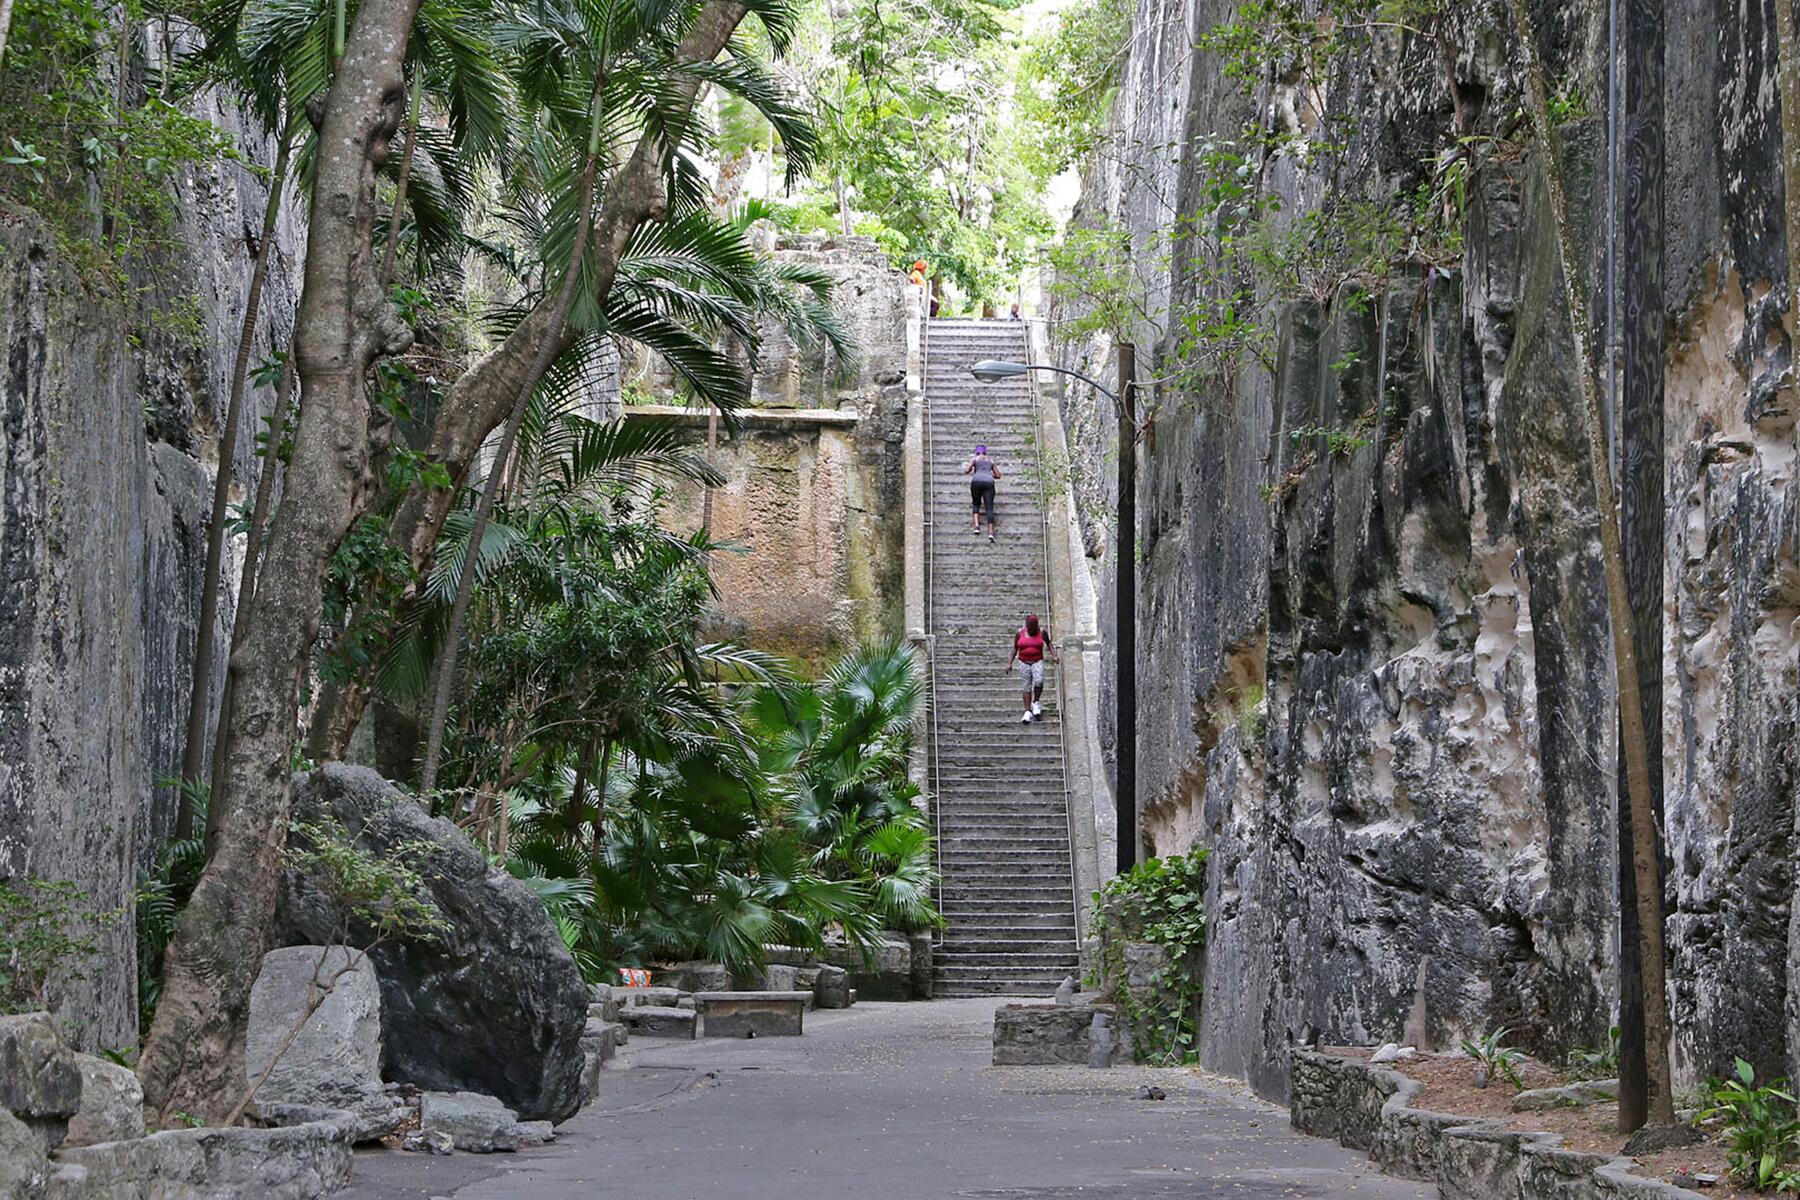 <a href='https://www.fodors.com/world/caribbean/bahamas/experiences/news/photos/20-ultimate-things-to-do-in-the-bahamas#'>From &quot;25 Ultimate Things to Do in the Bahamas: Ascend and Descend the Queen’s Staircase&quot;</a>